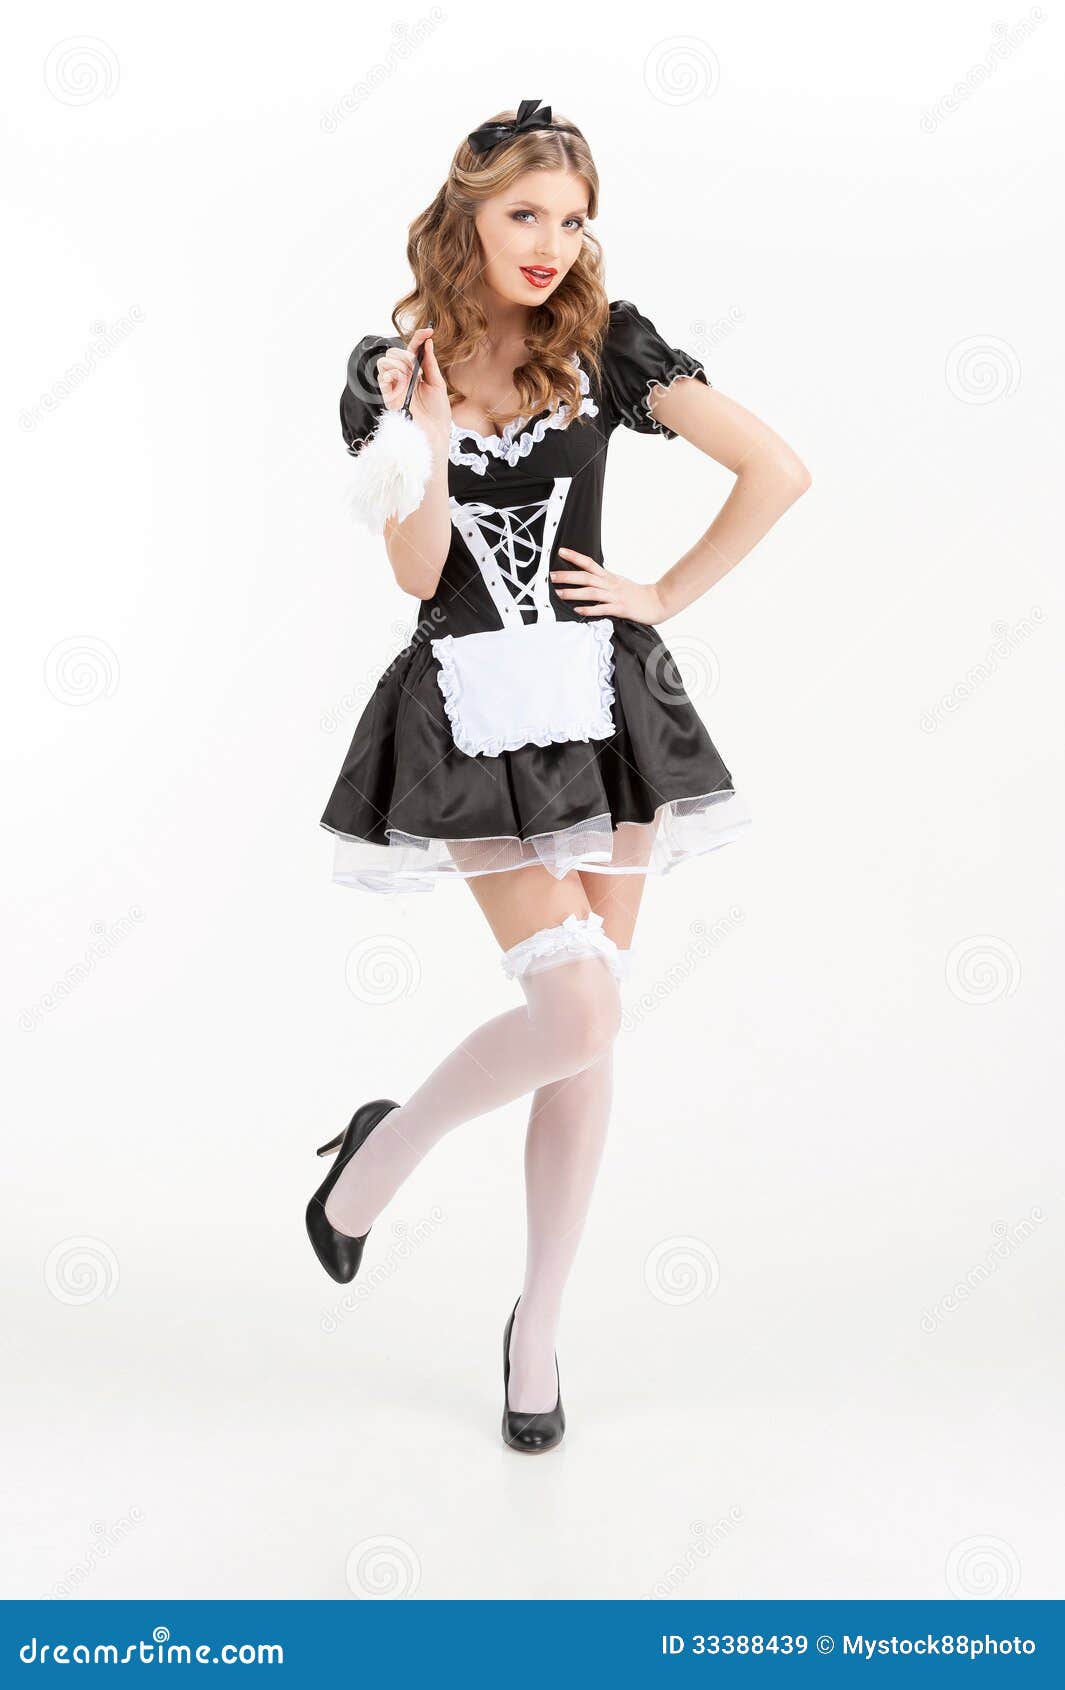 Maid. Beautiful Young Maid in White Pantyhose Holding Brush Stock Image ...